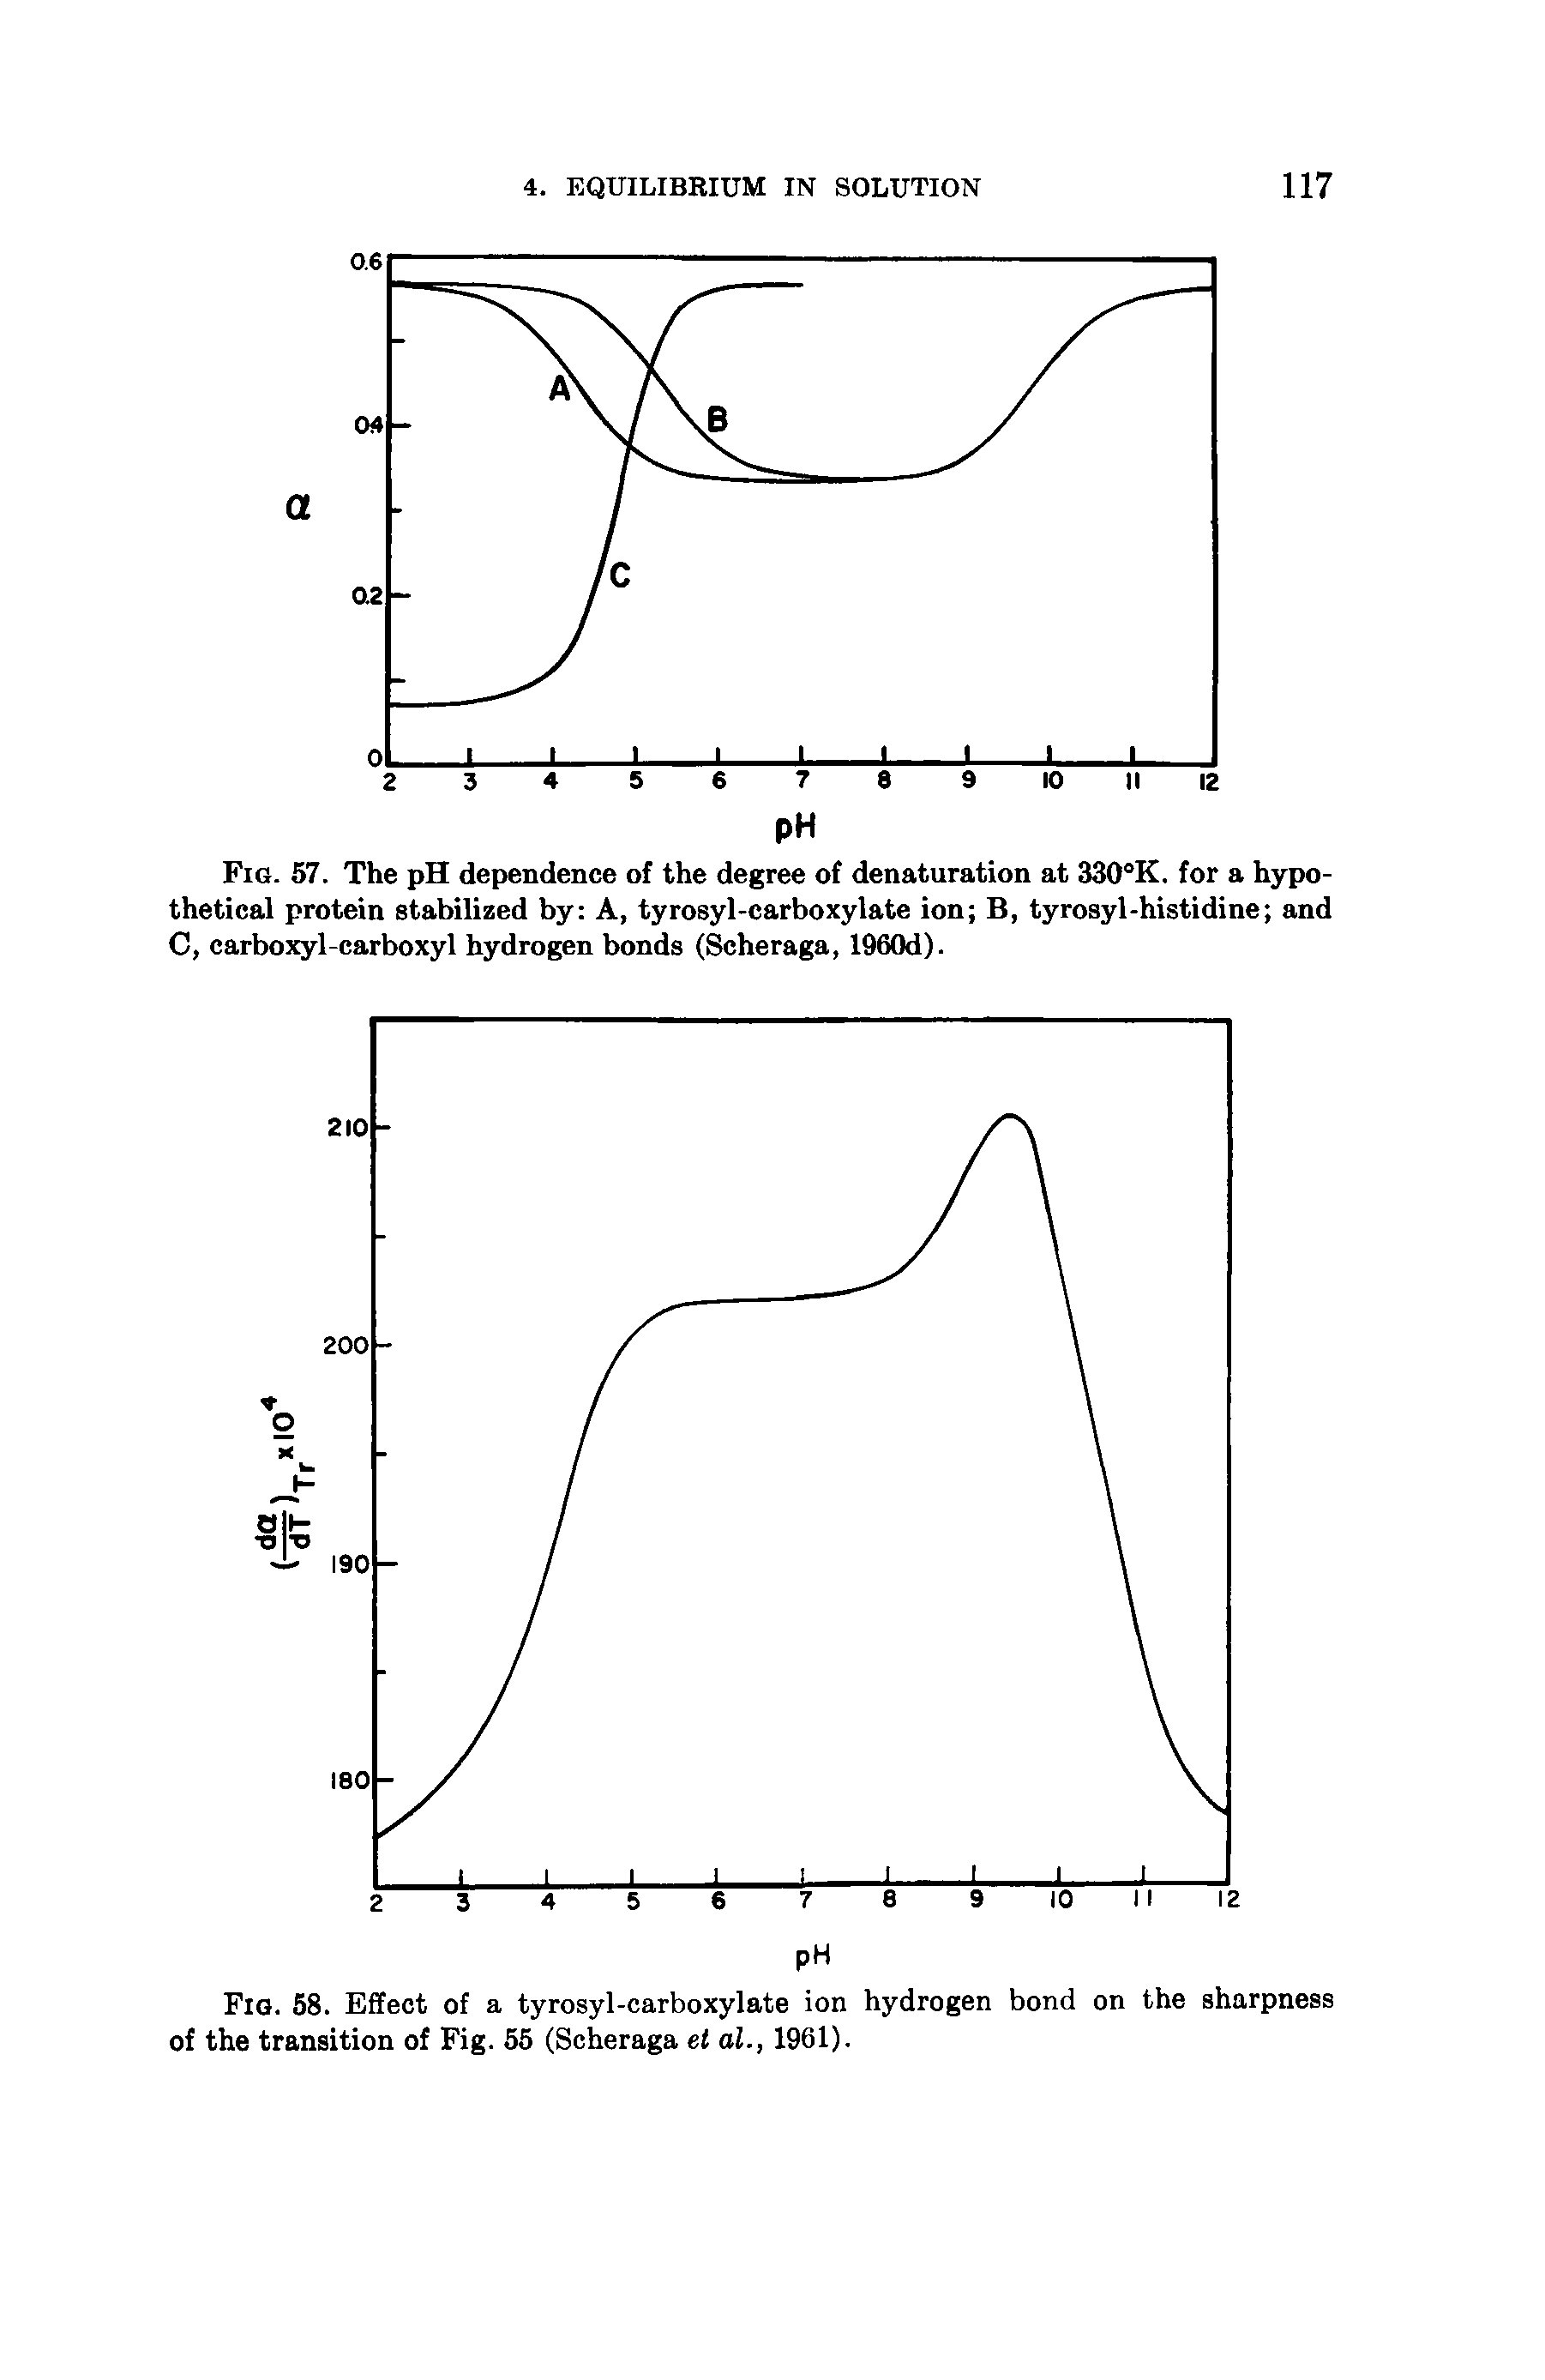 Fig. 58. Effect of a tyrosyl-carboxylate ion hydrogen bond on the sharpness of the transition of Fig. 55 (Scheraga el al., 1961).